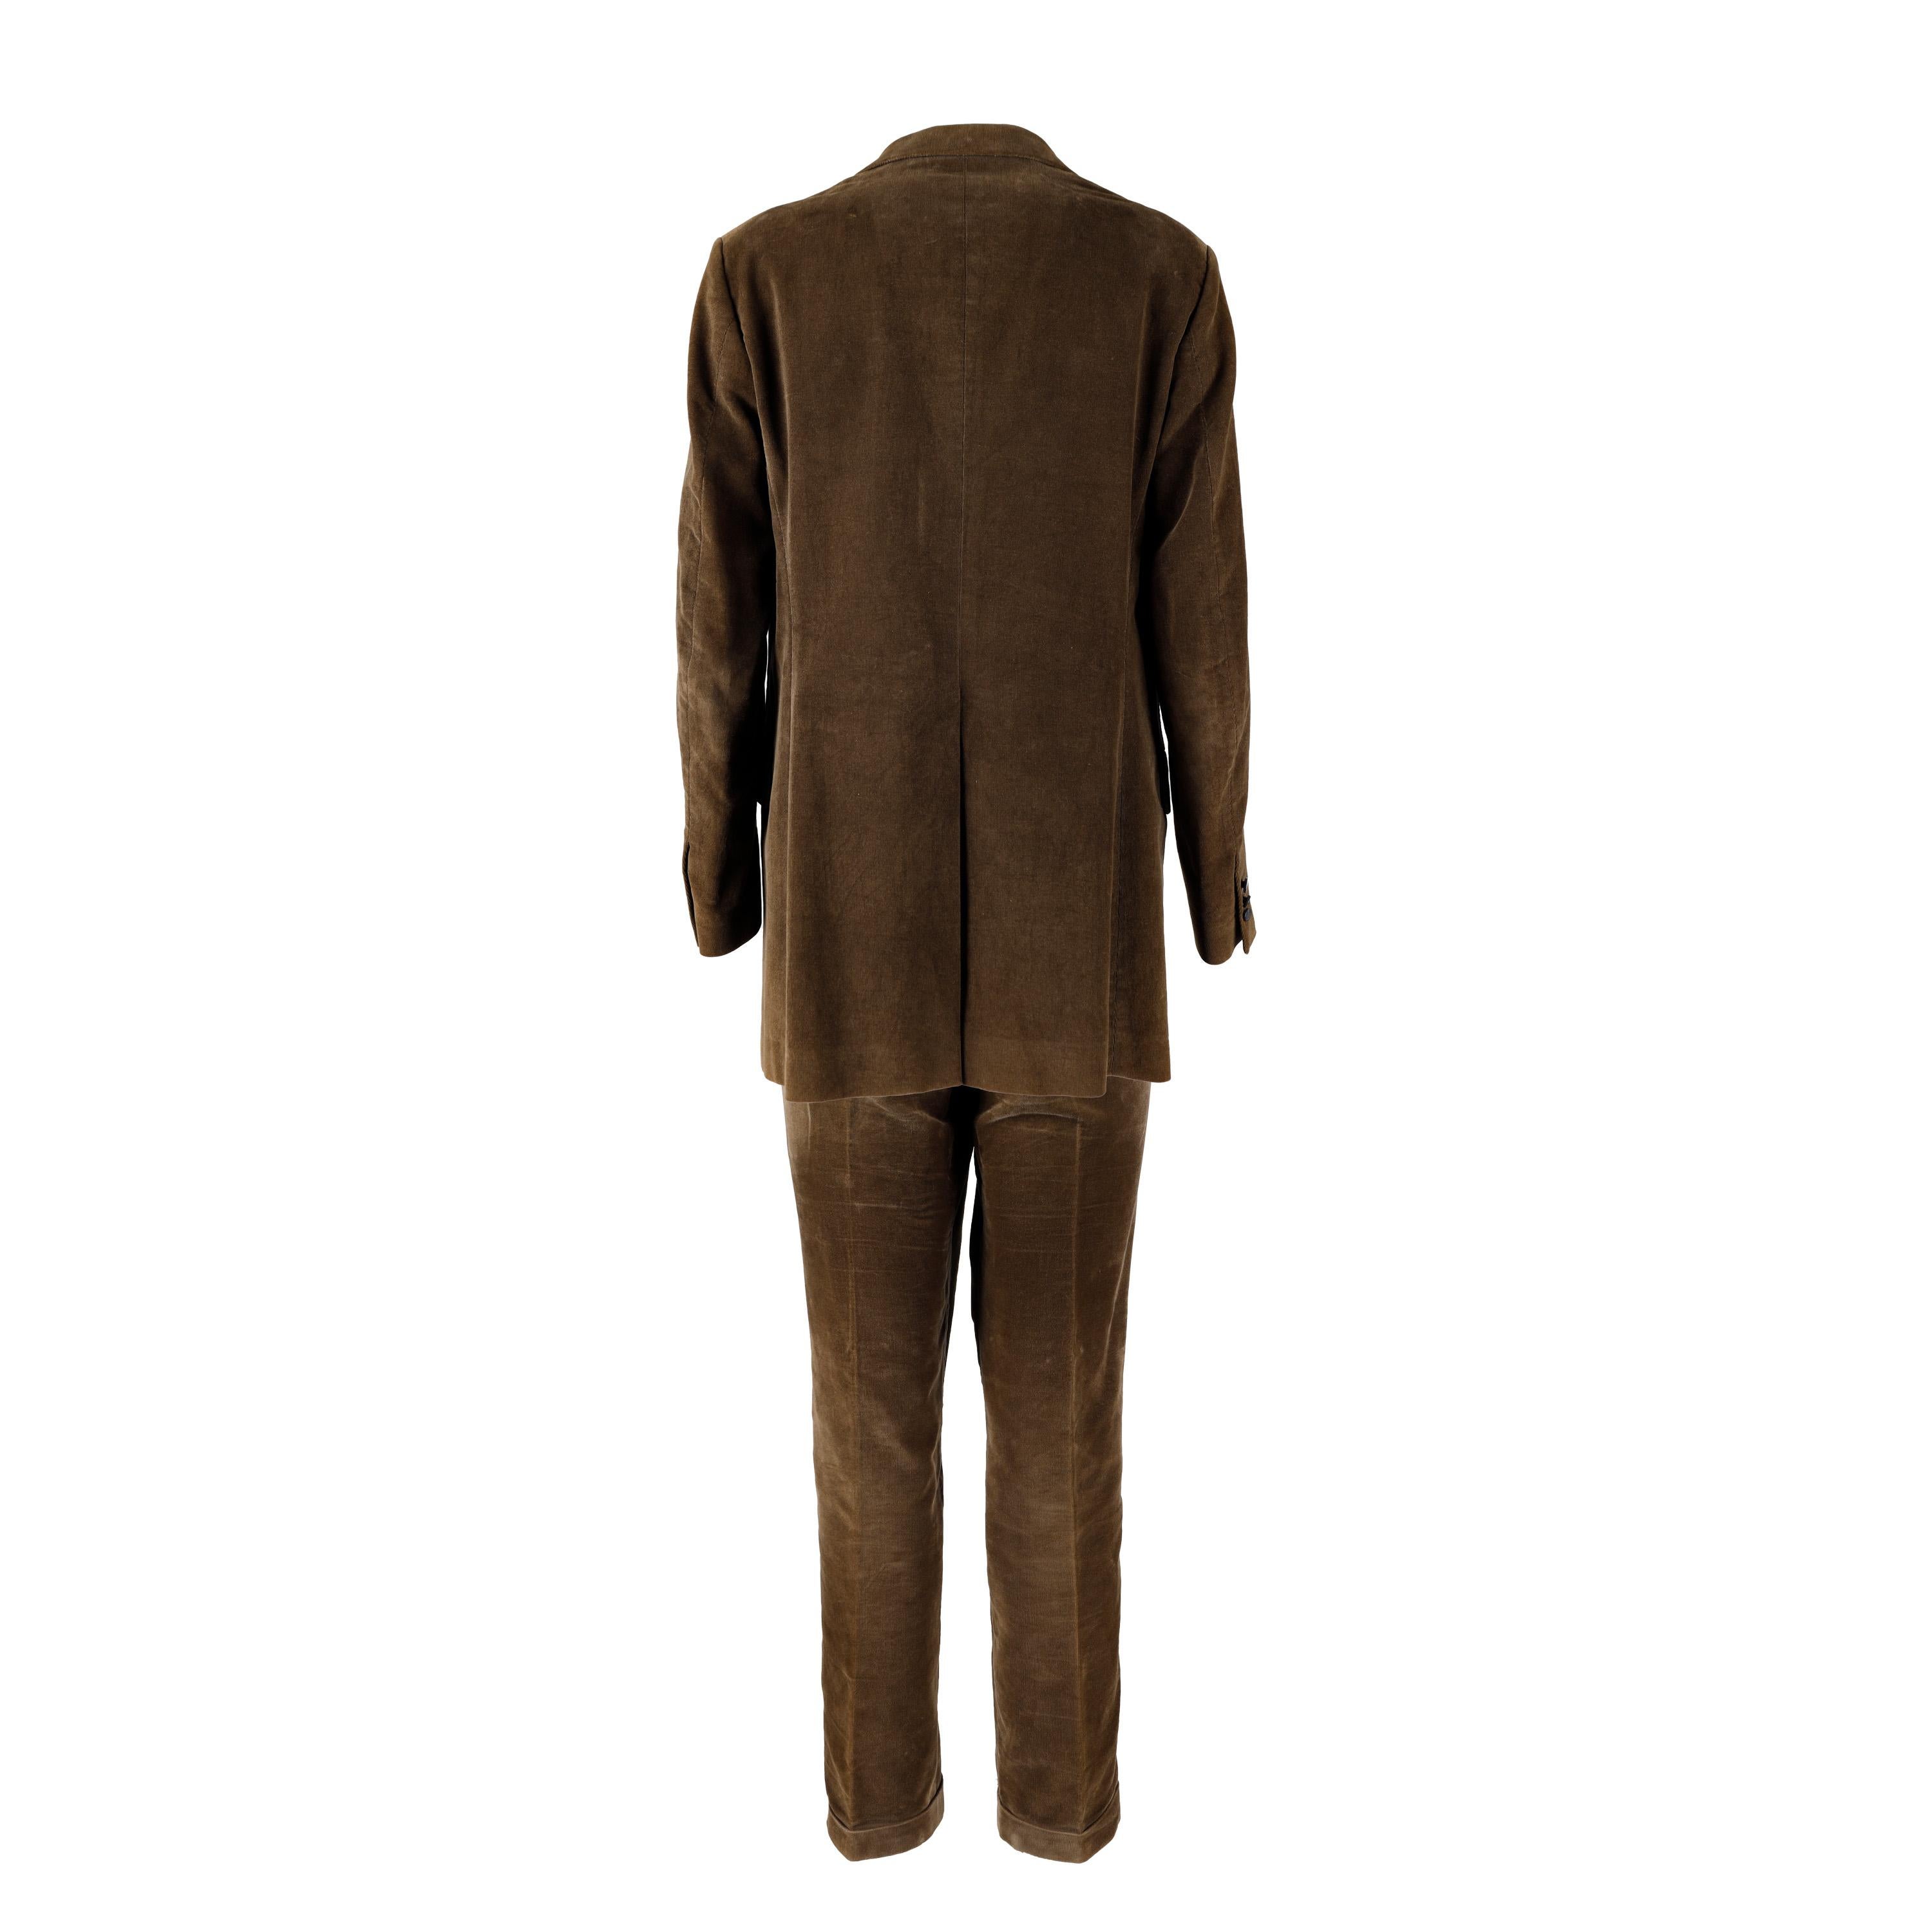 Vivienne Westwood Corduroy Suit  In Excellent Condition For Sale In Milano, IT